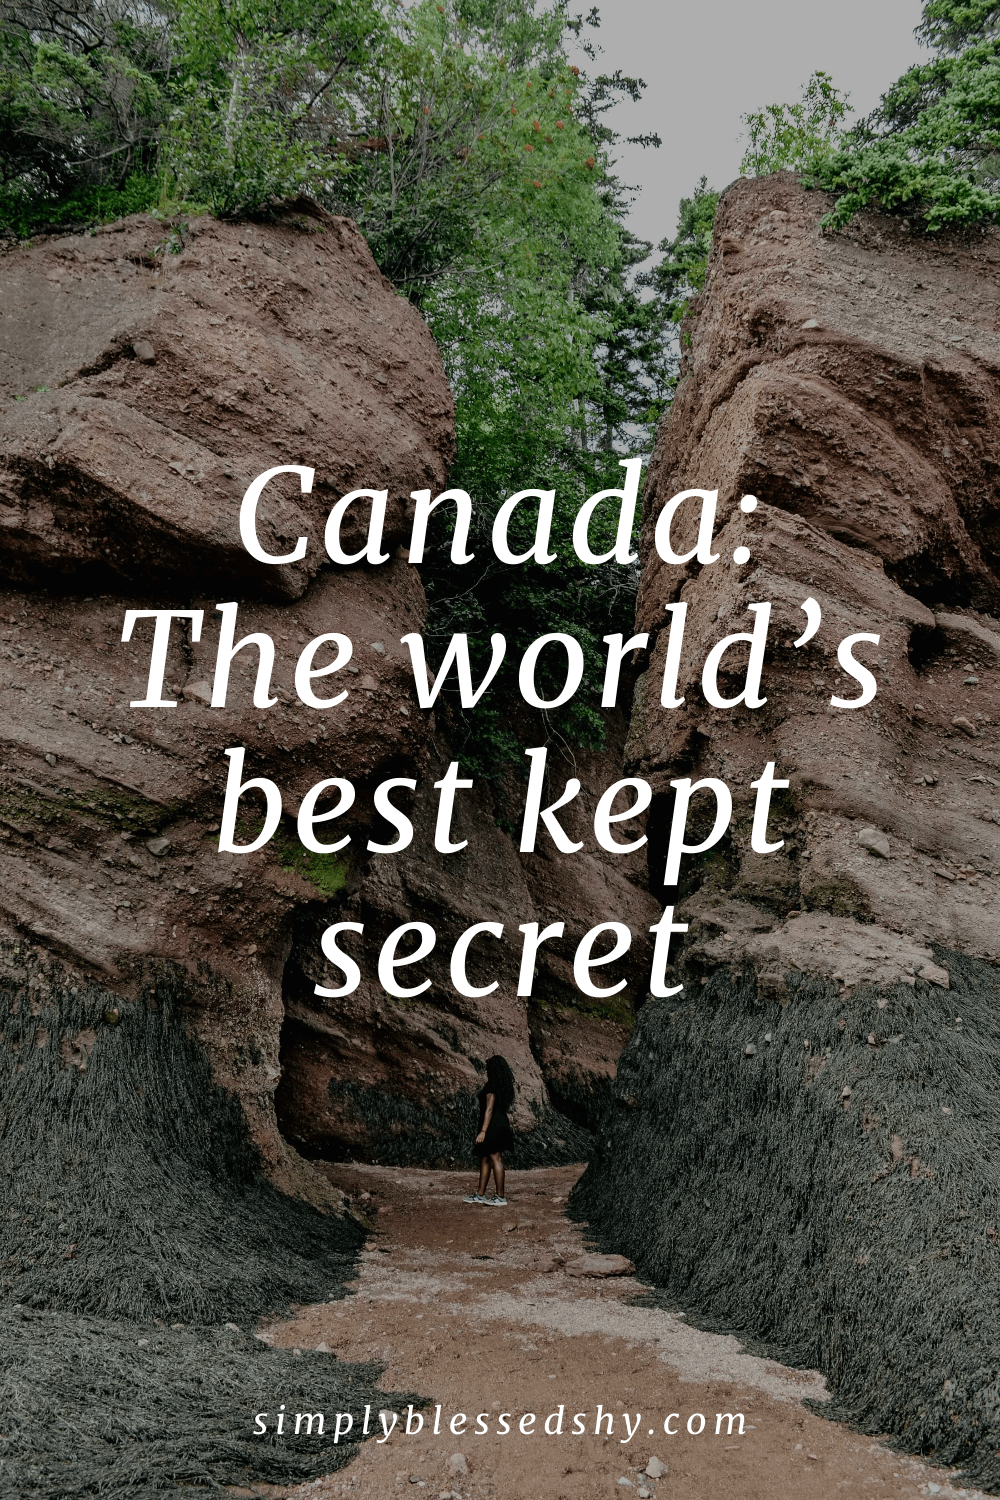 Canada: The worlds best kept secret quote